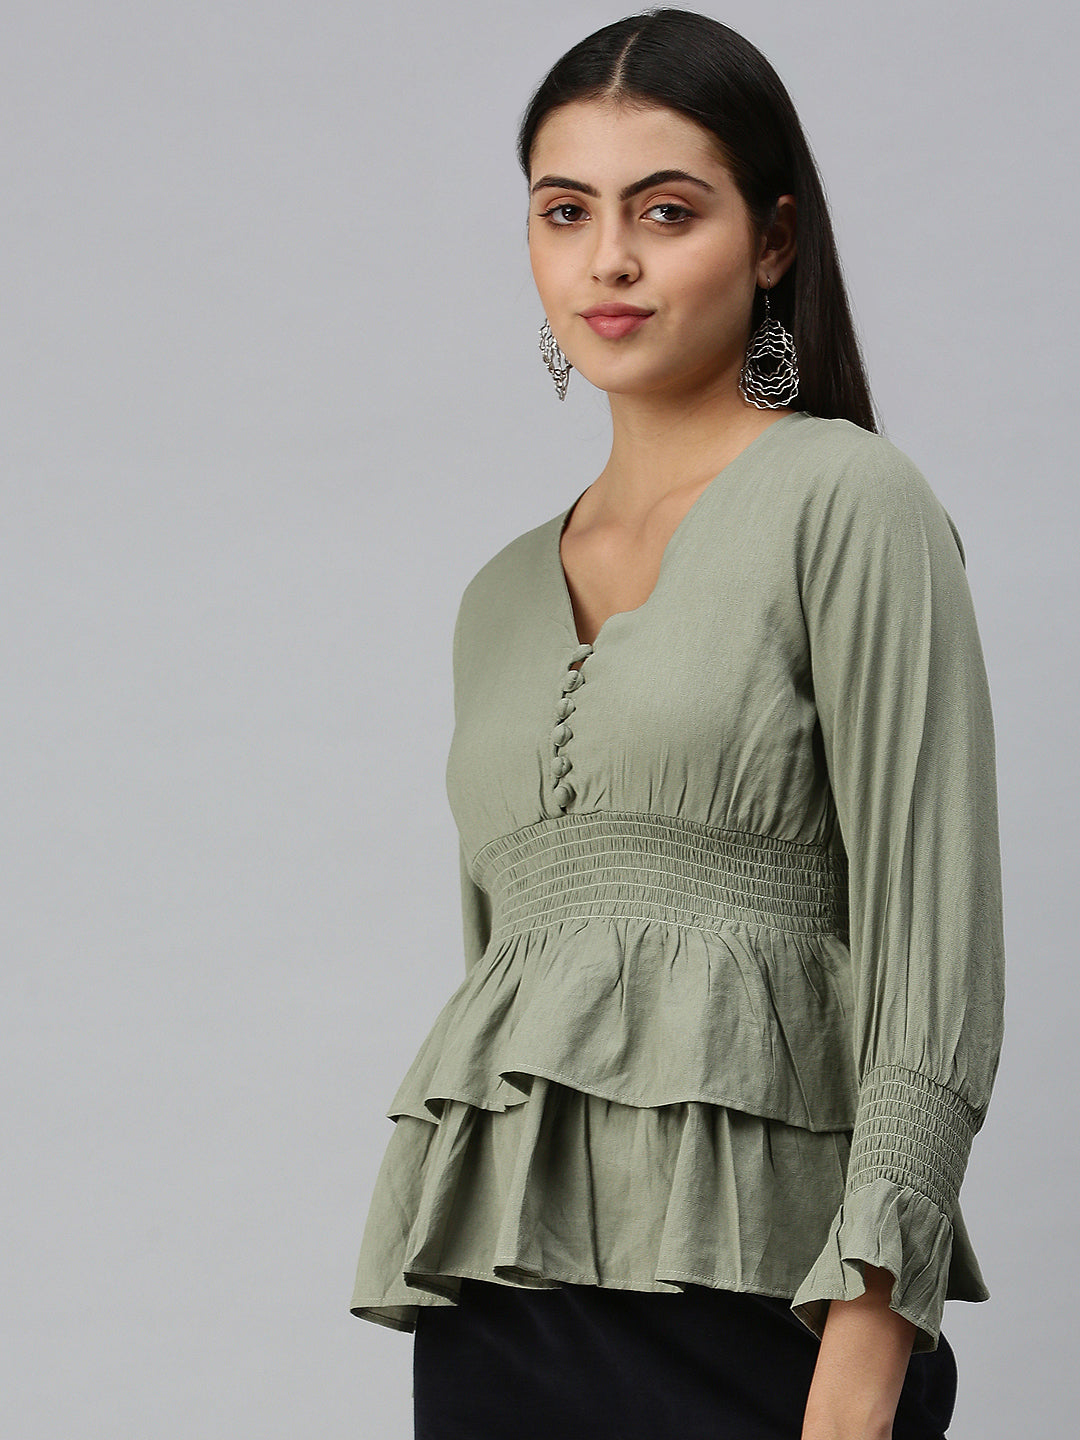 Women's Solid Olive Top